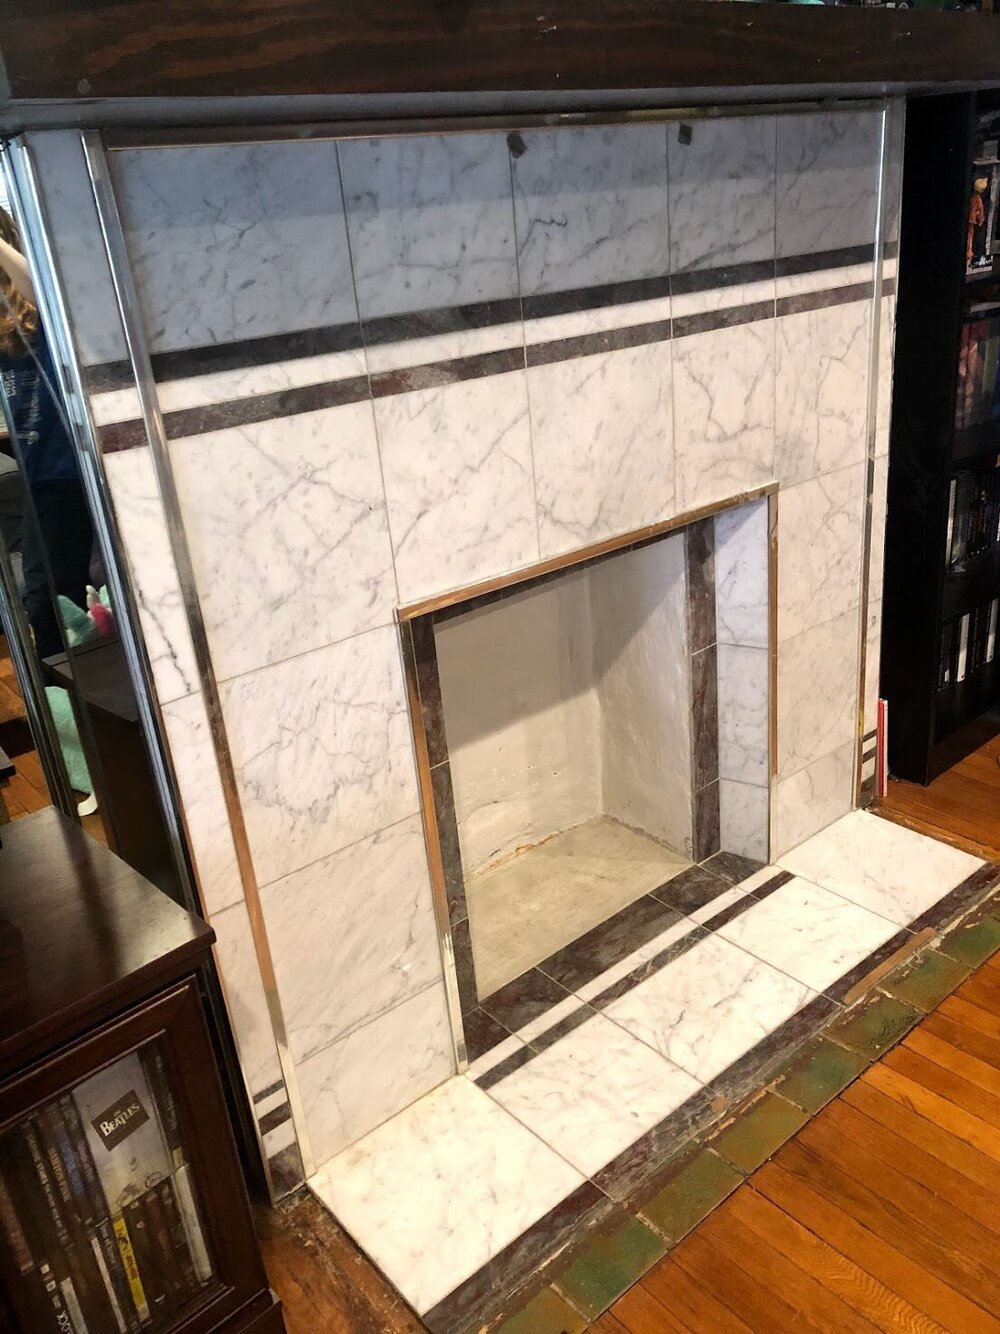  Look at this ugly ass 1980’s fireplace that is covering some beautiful 1917 terra-cotta tiles. Just ripe for the dismantling!  